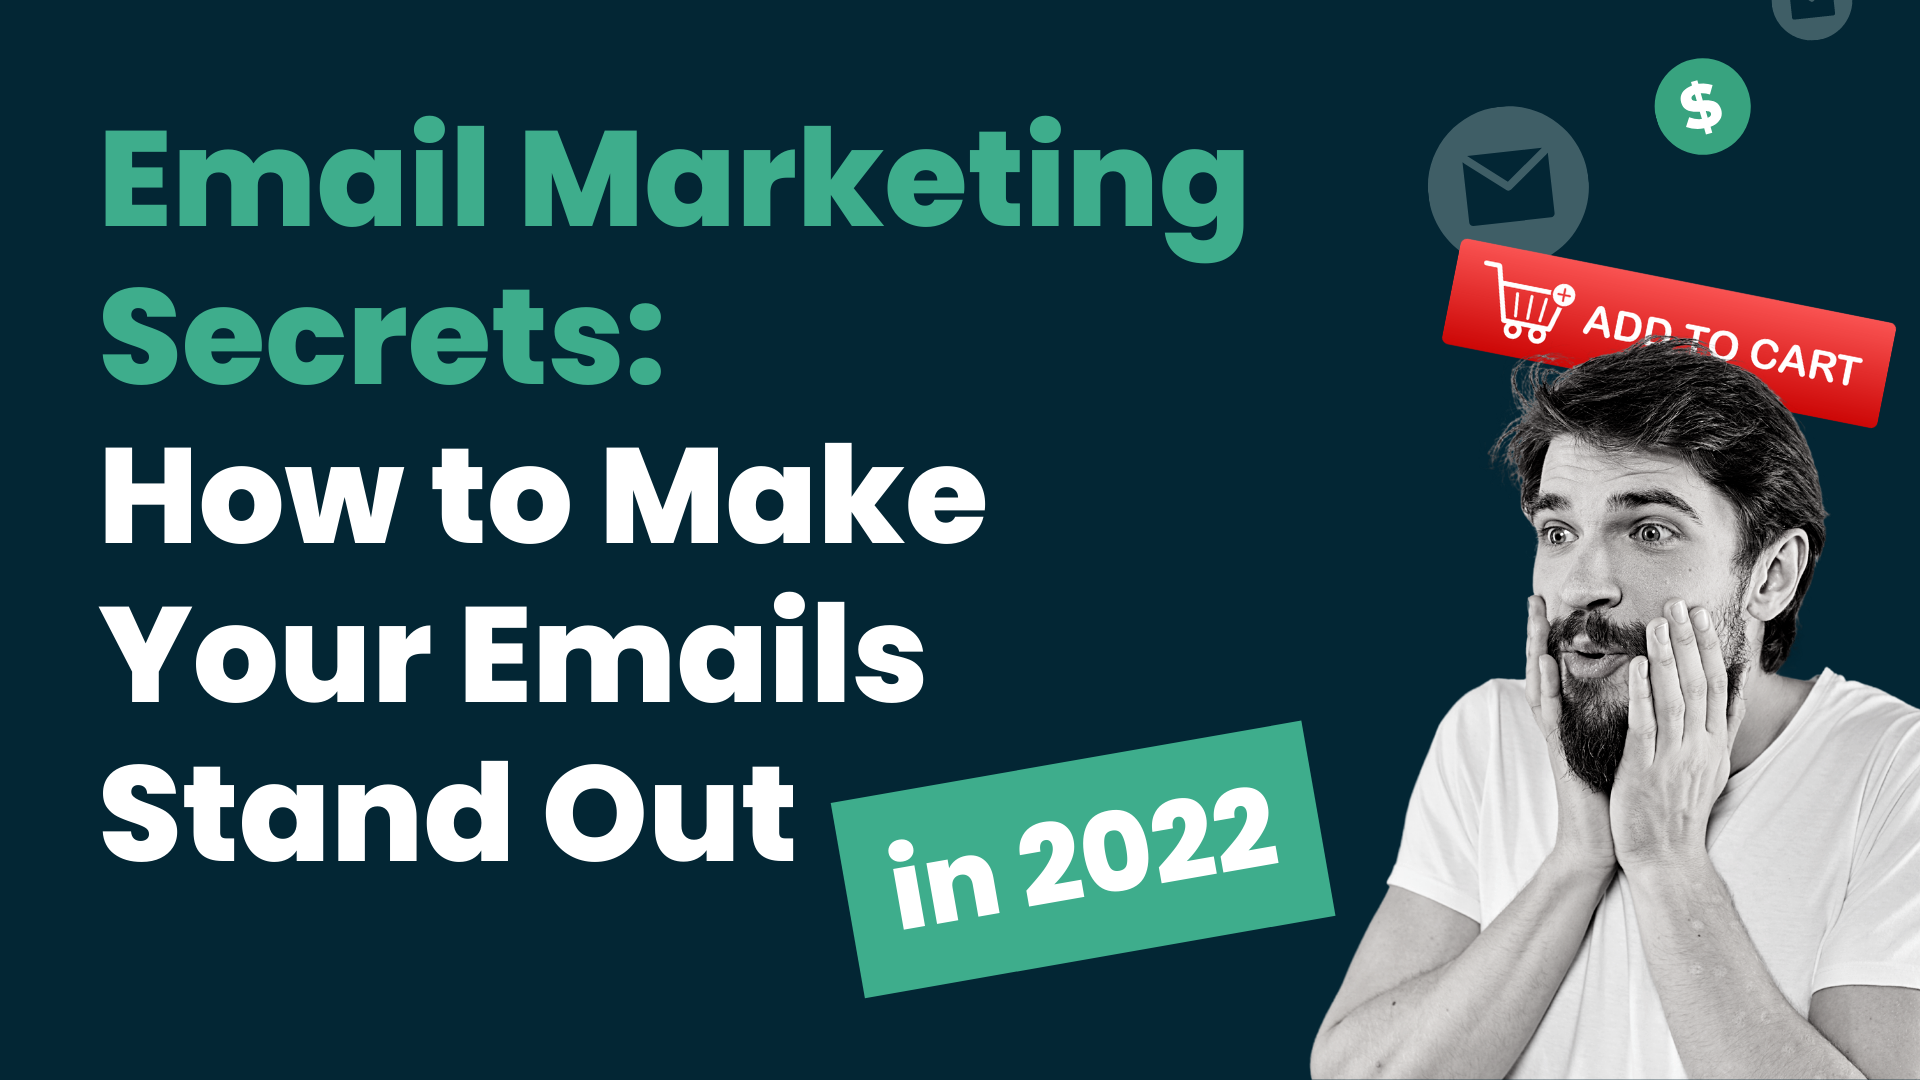 Email Marketing Secrets:  How to Make Your Emails Stand Out  in 2022